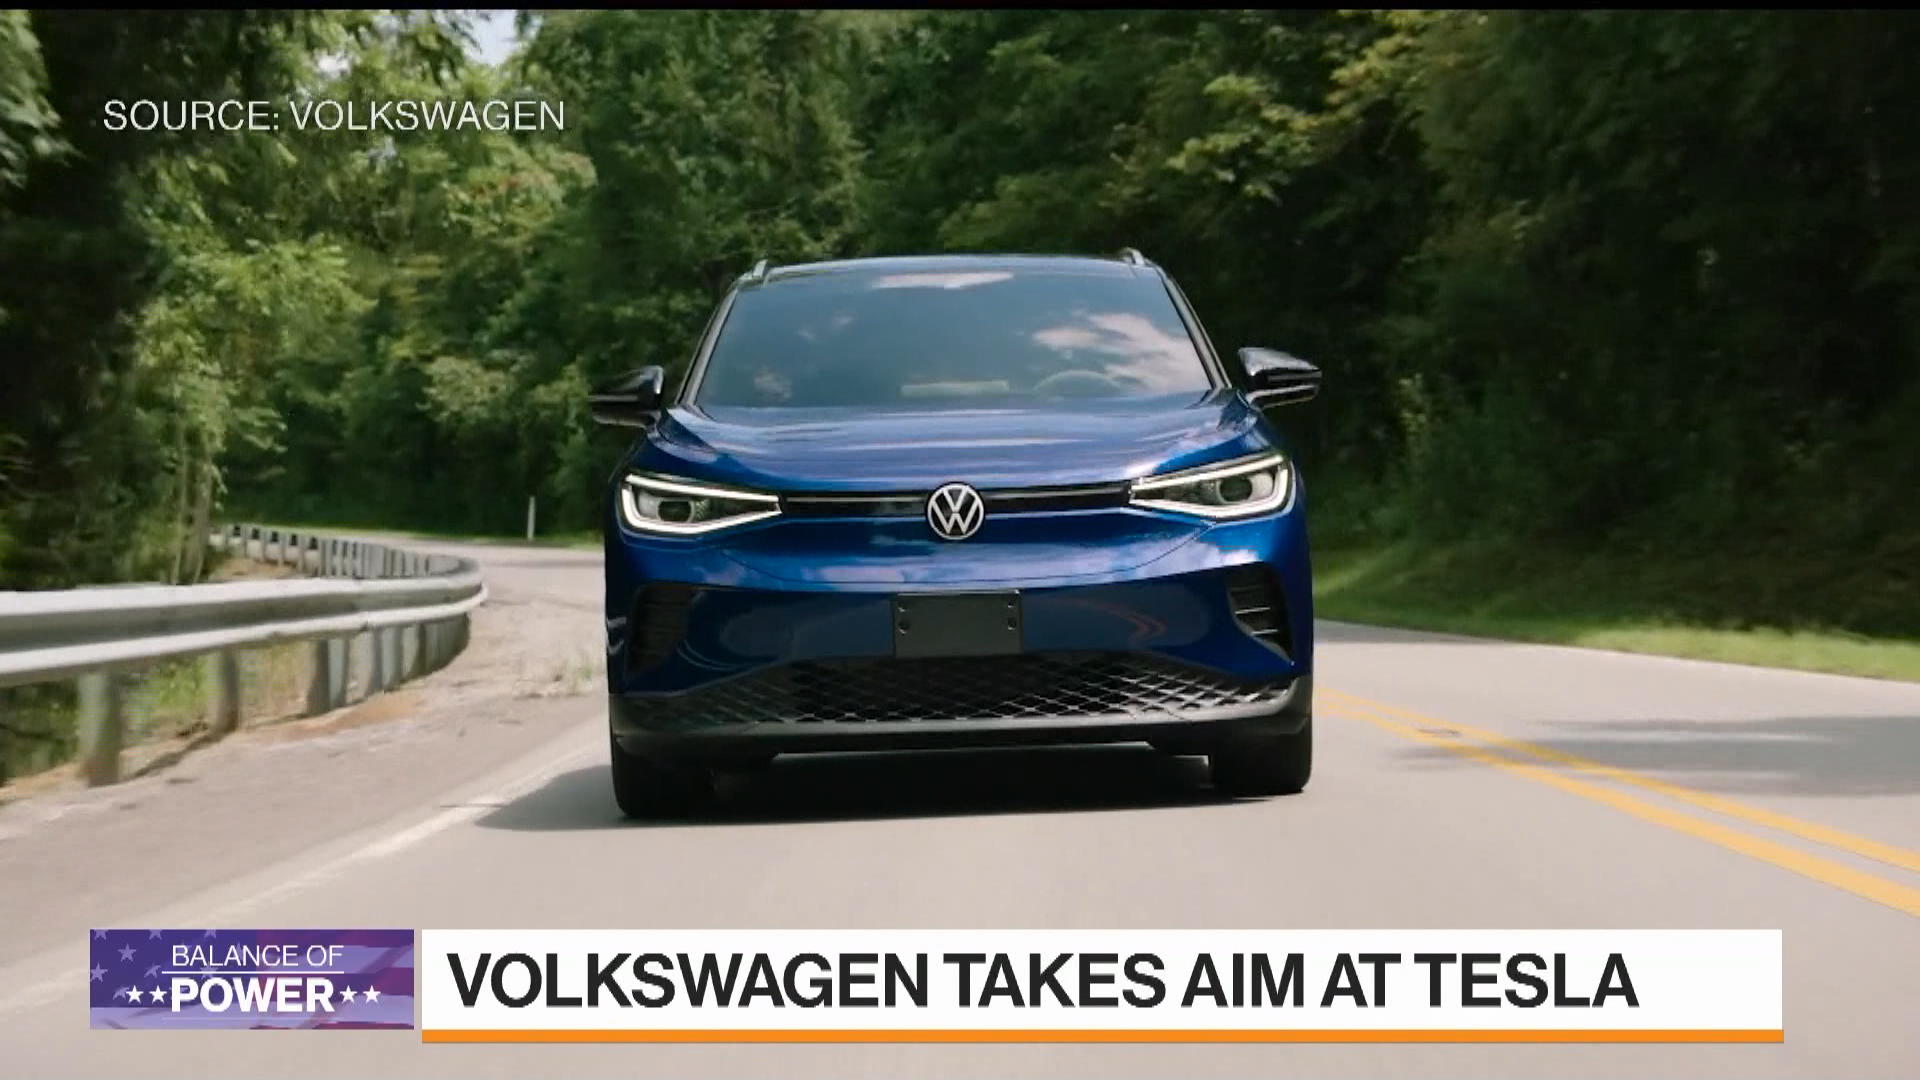 Volkswagen is a ‘Counterbalance’ to Tesla, says U.S. Chief